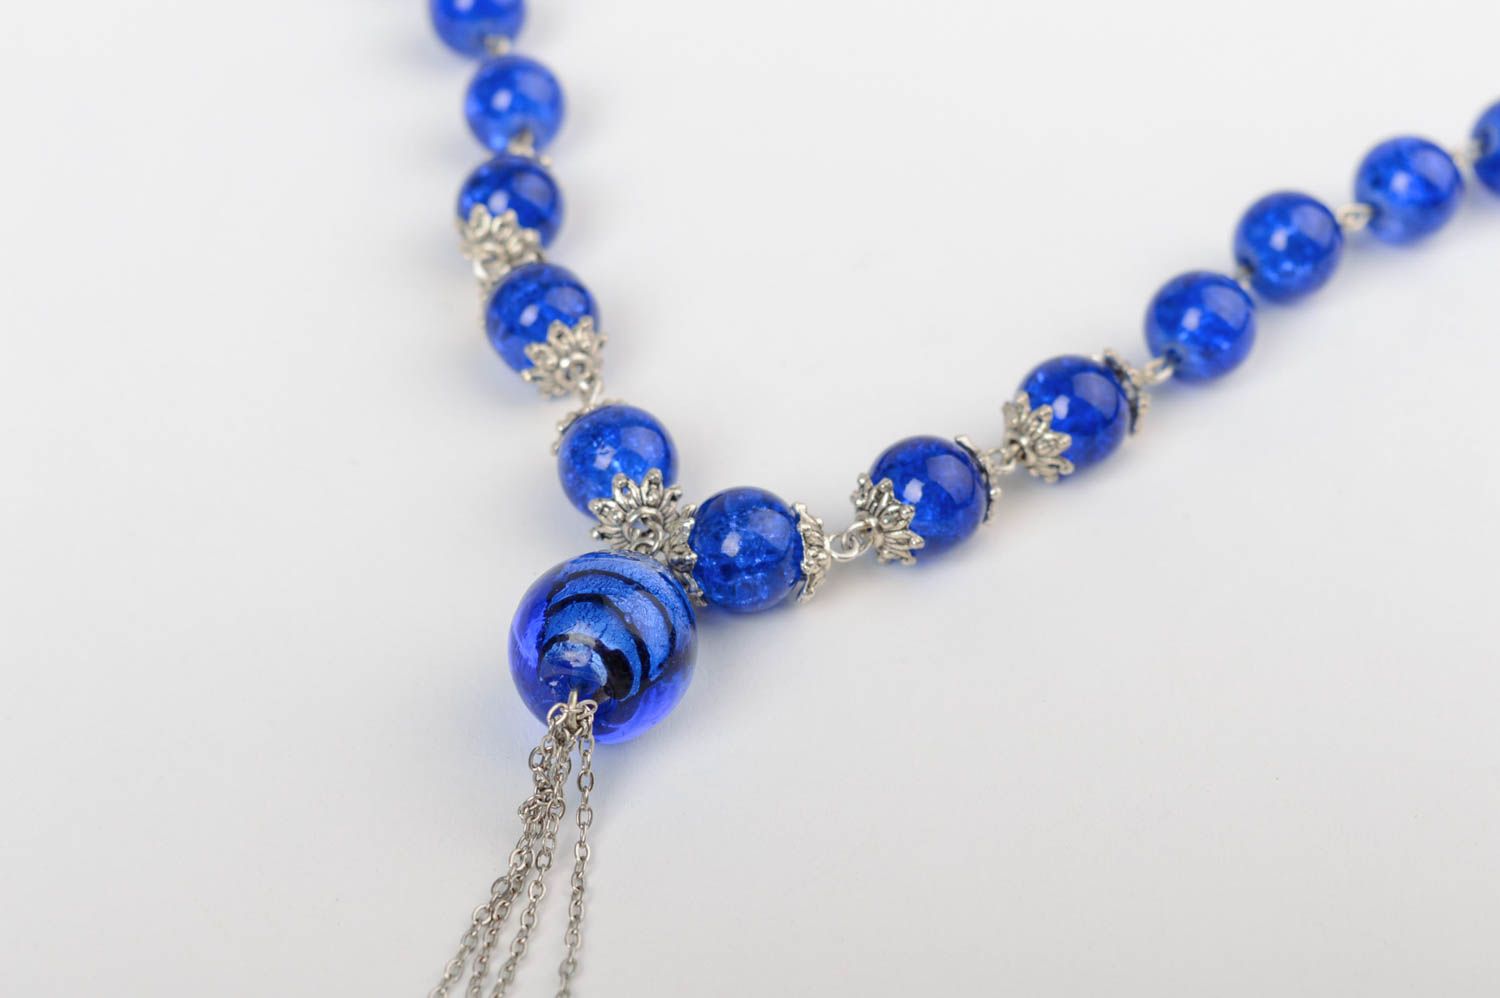 Handmade deep blue designer necklace with glass beads on satin ribbon photo 2